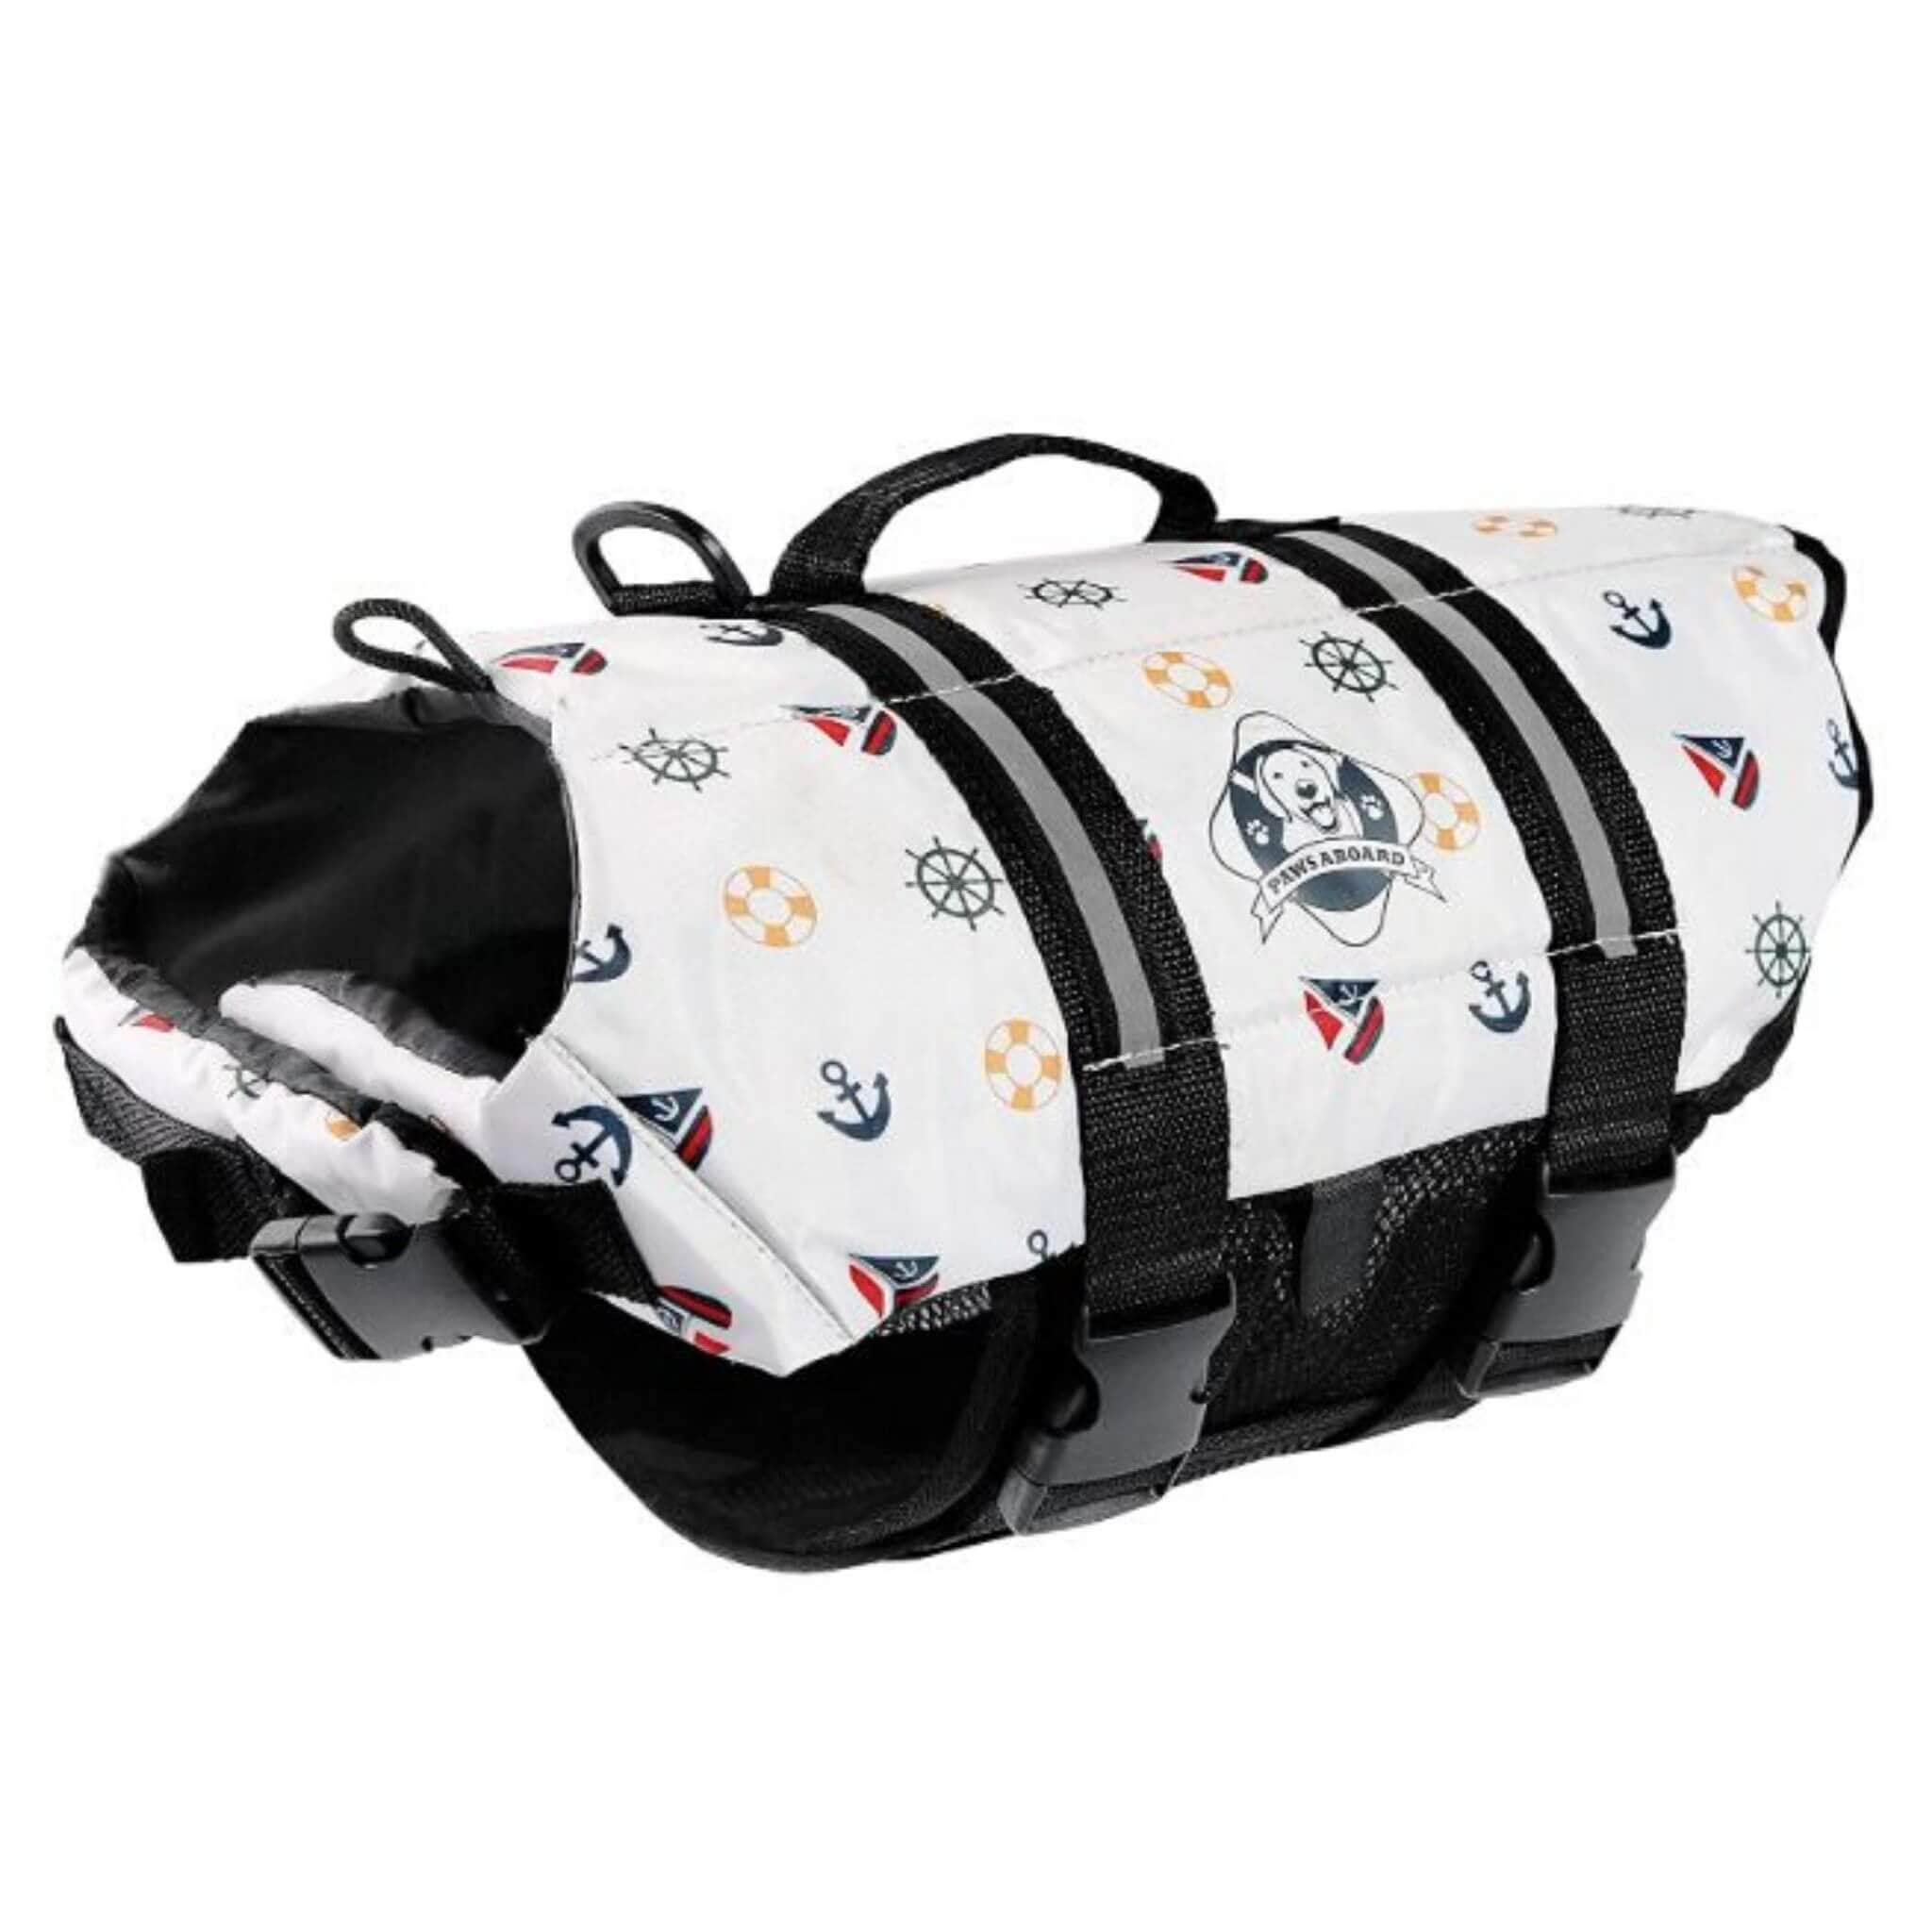 Paws Aboard Dog Life Jacket - Nautical Theme - For Dogs 2 to 50 lbs ...